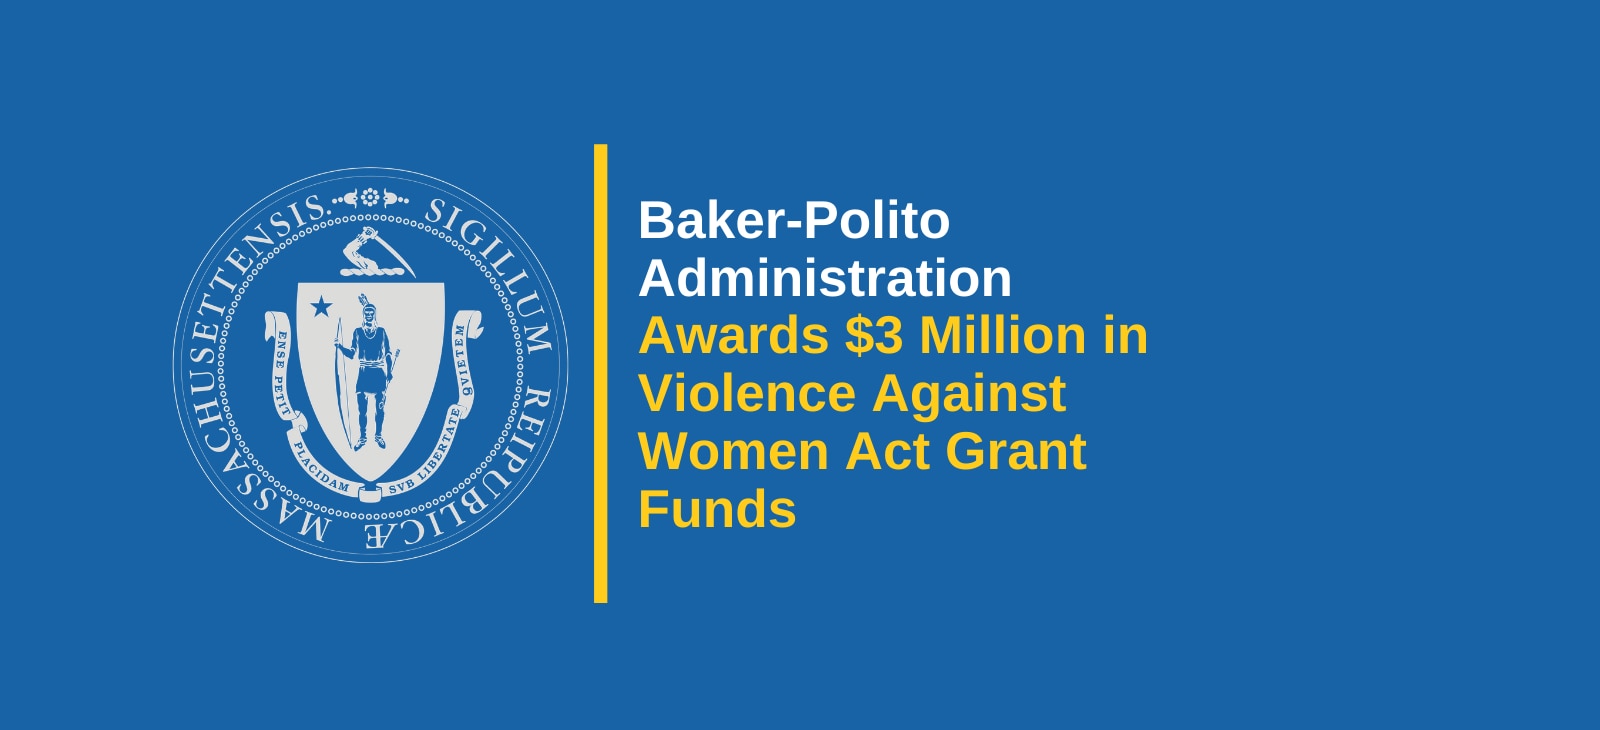 Baker-Polito Administration Awards $3 Million in Violence Against Women Act Grant Funds